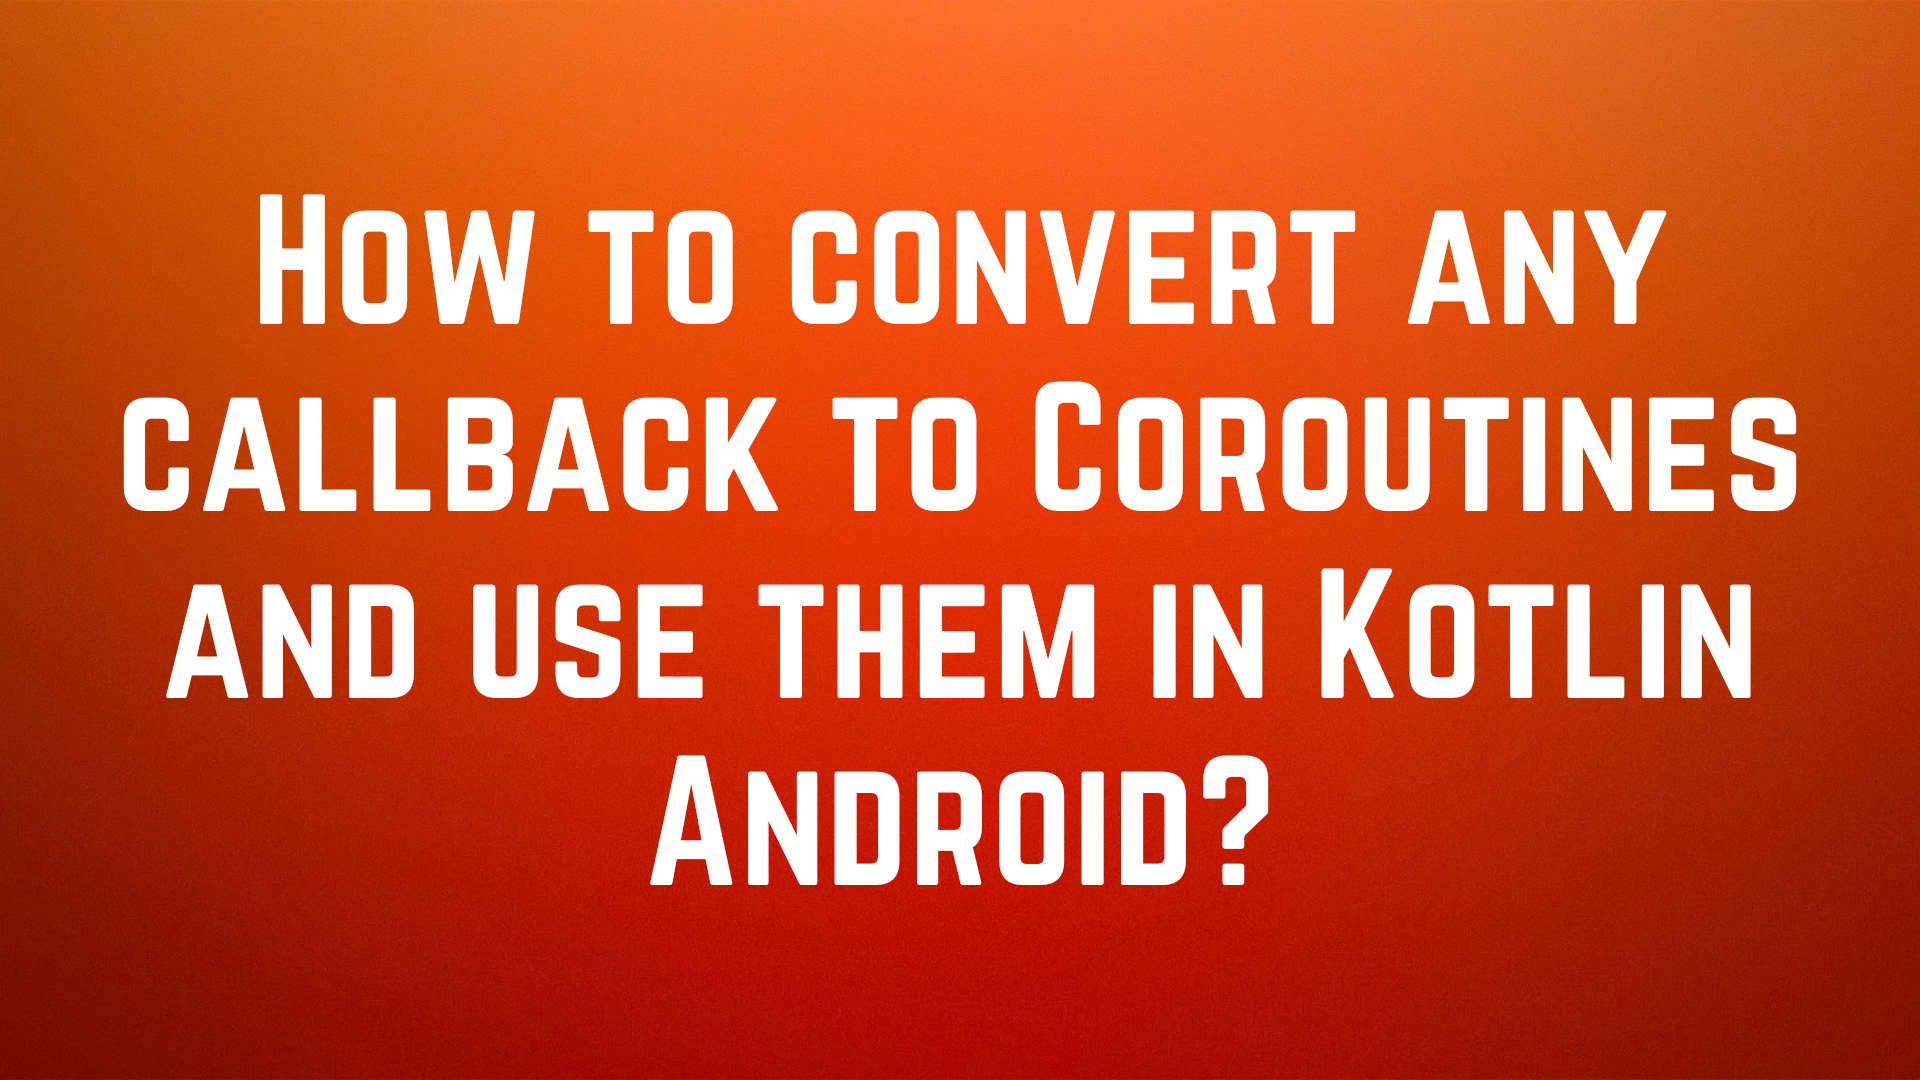 How to convert any callback to Coroutines and use them in Kotlin Android?